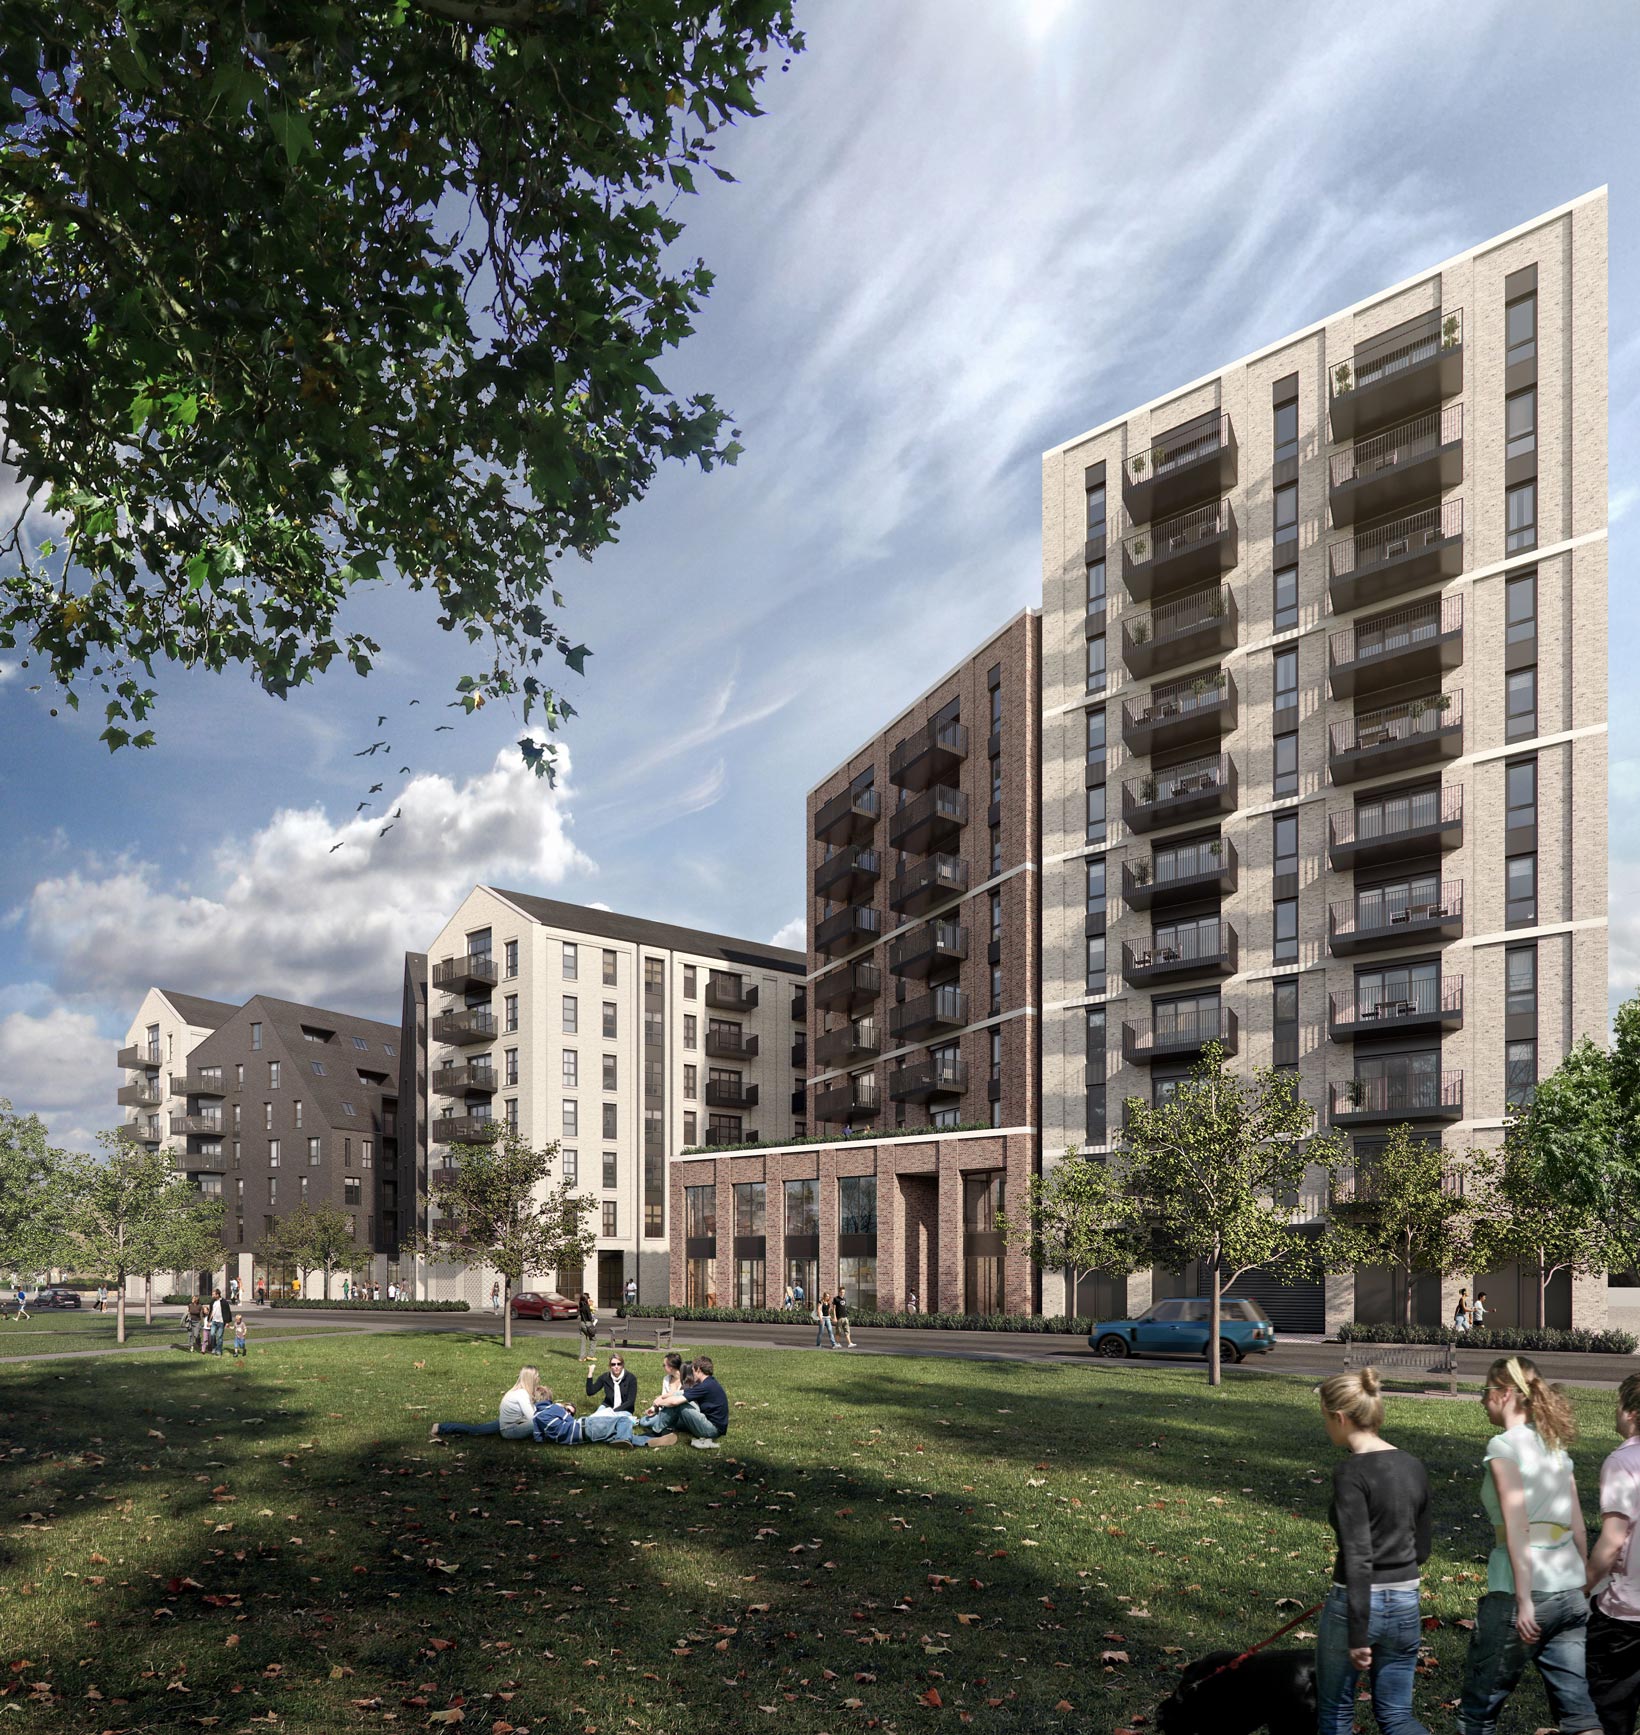 Weston Homes and Be First London partner for affordable homes at Town Quay Wharf in Barking